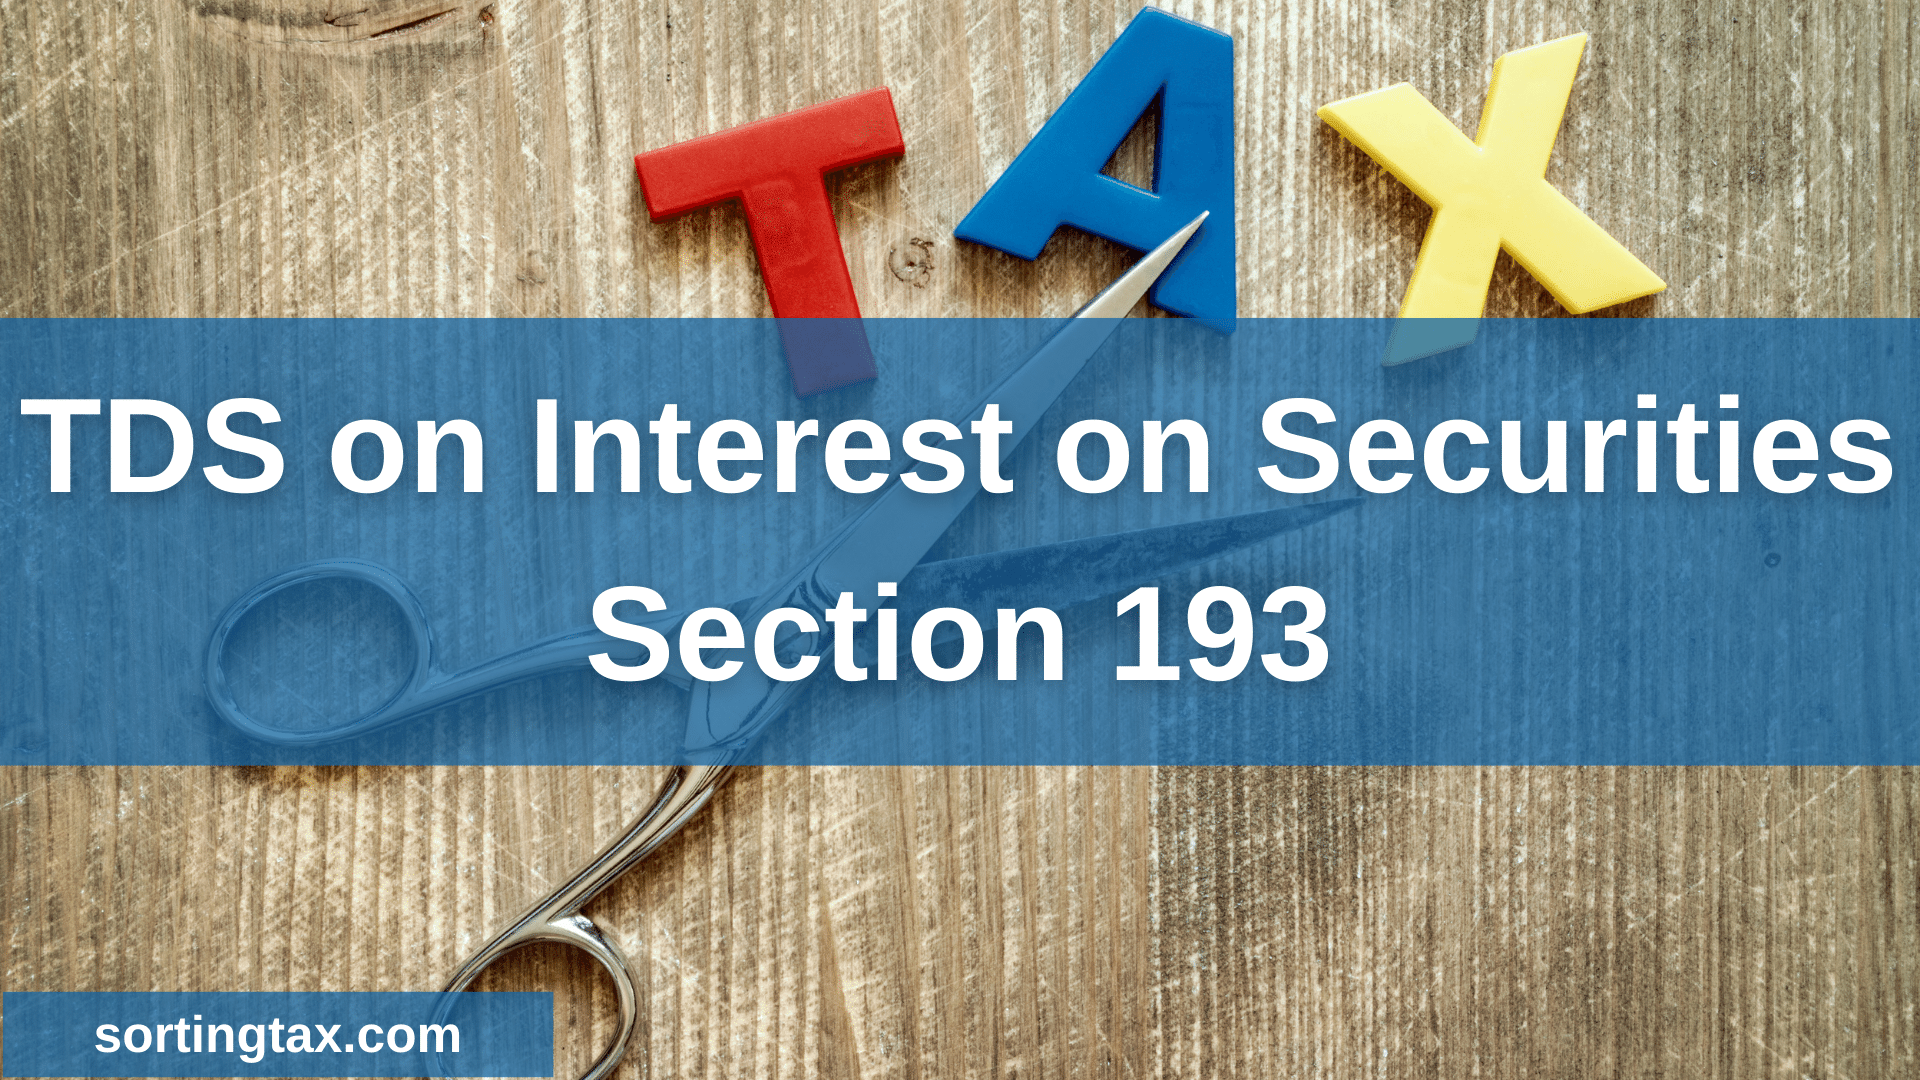 Section 193 of Income Tax Act - TDS on Interest on Securities